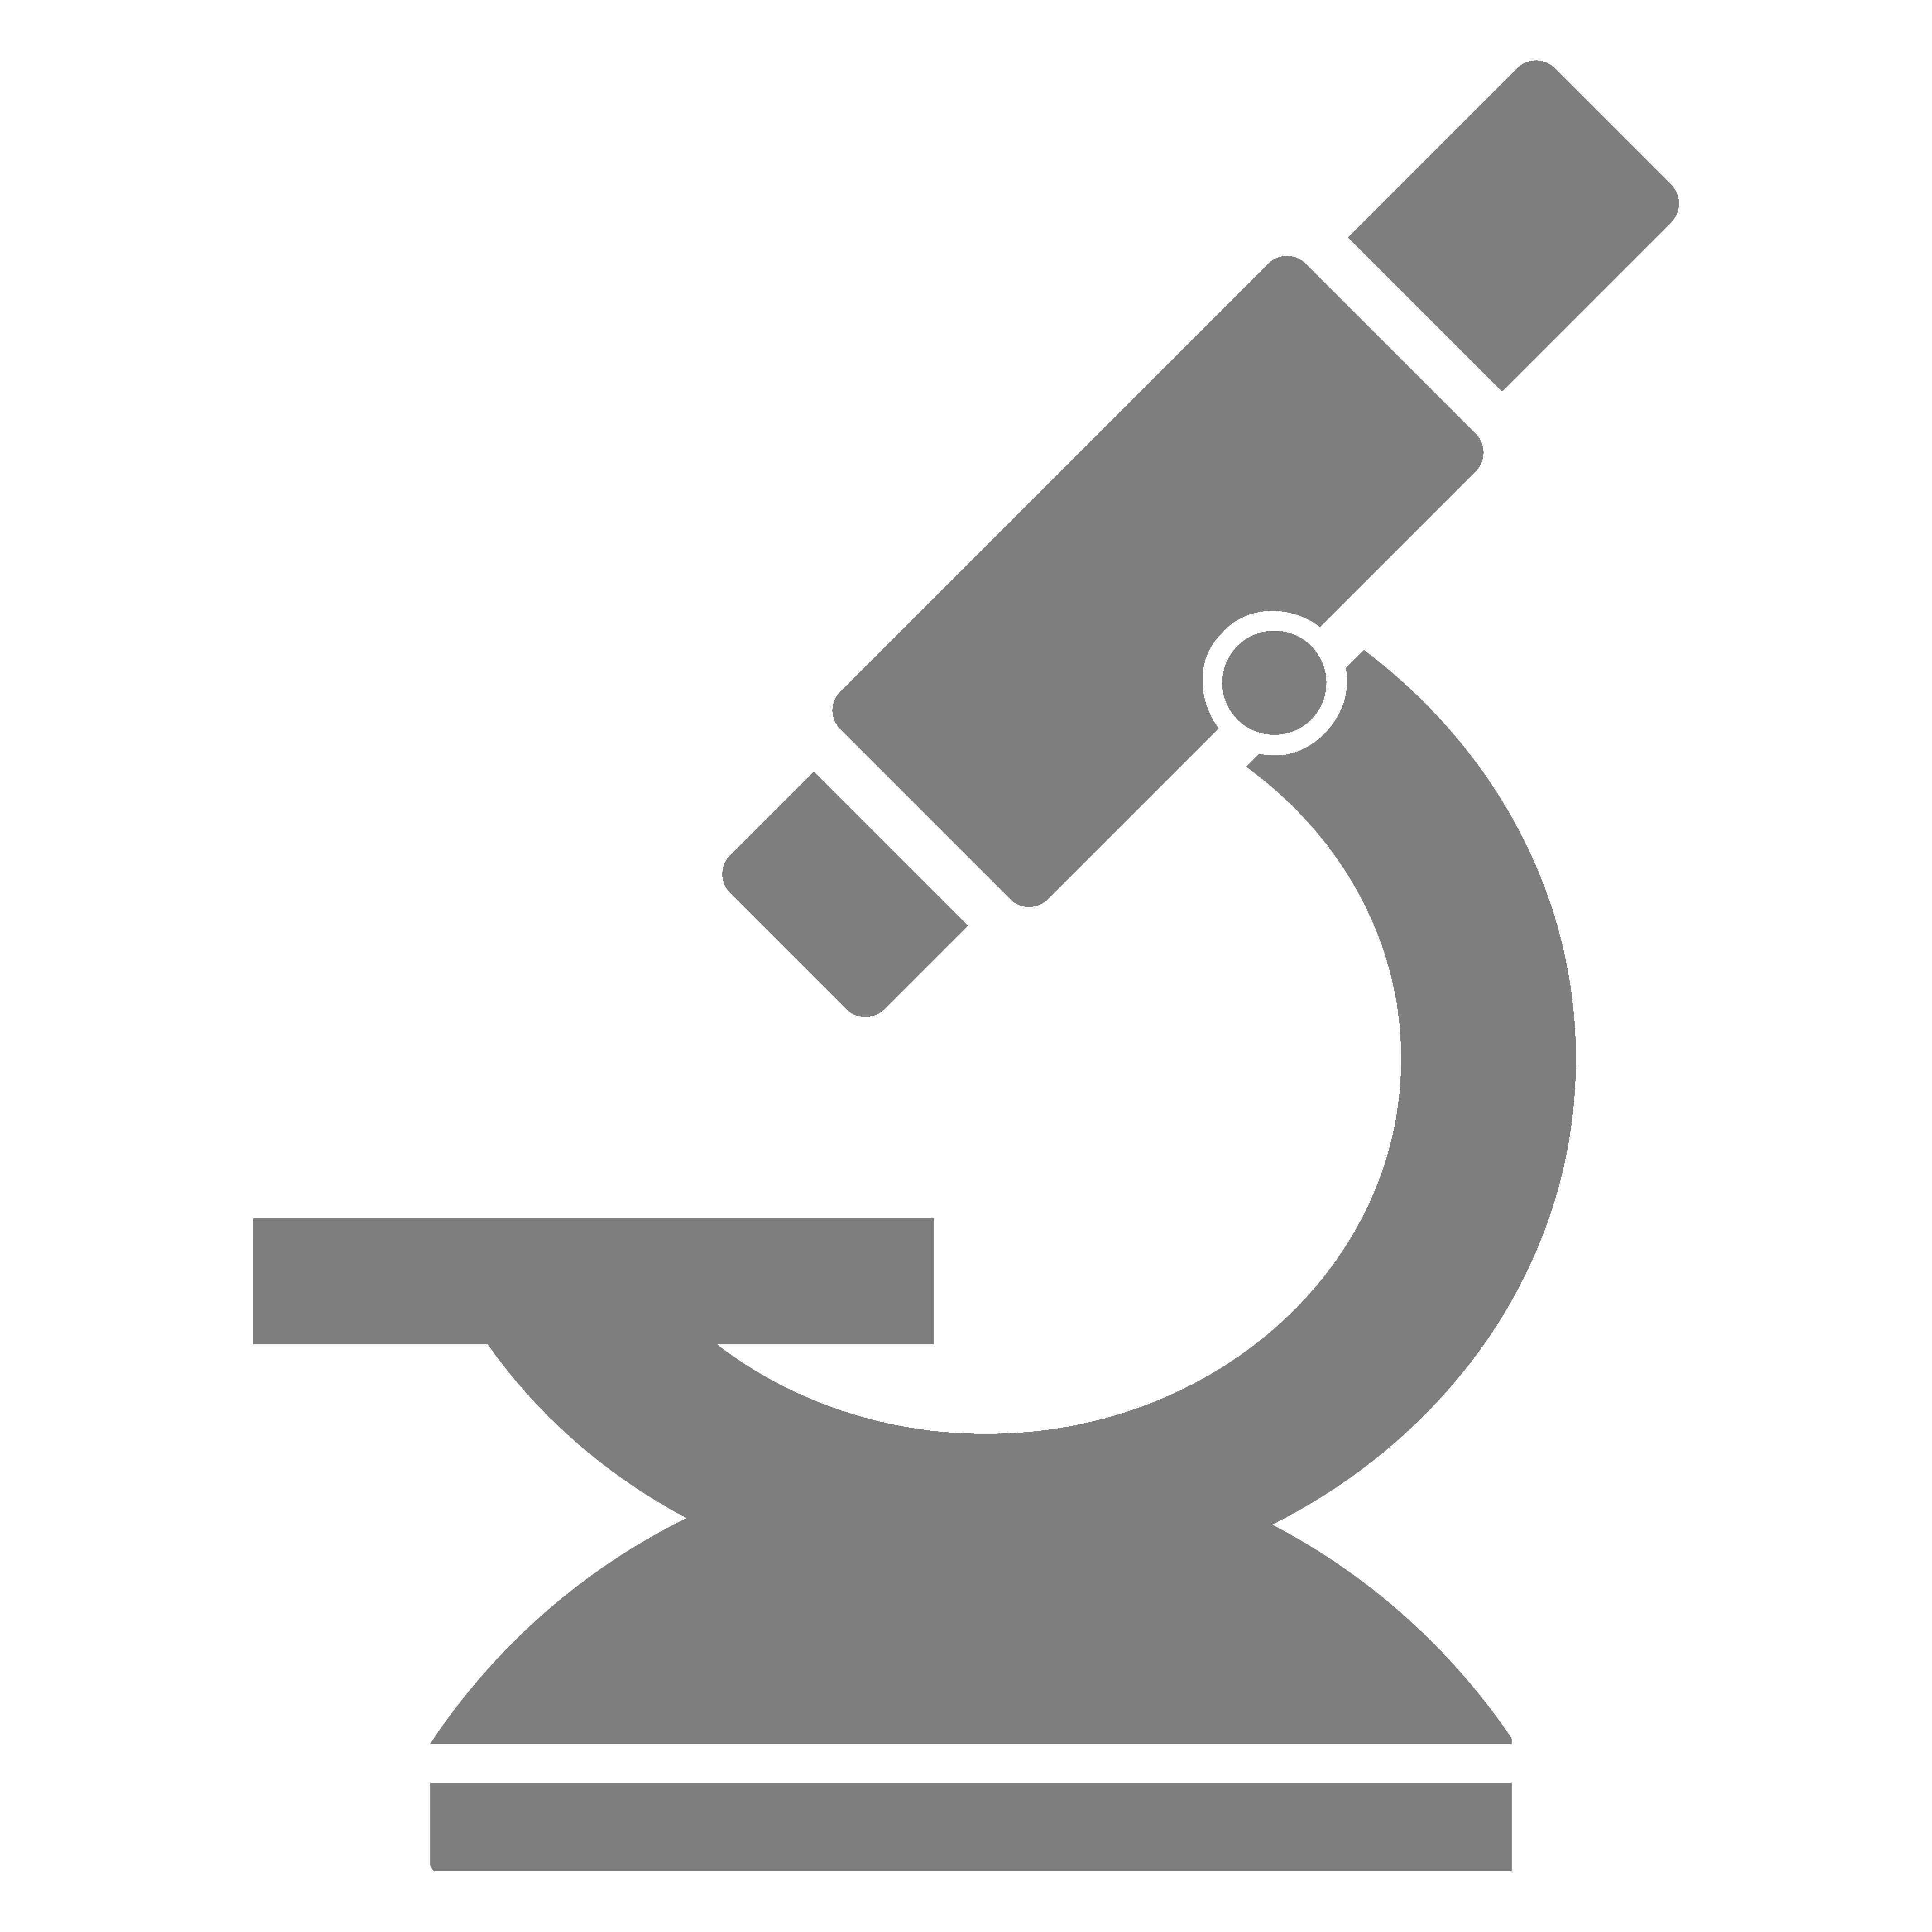 microscope clipart science research